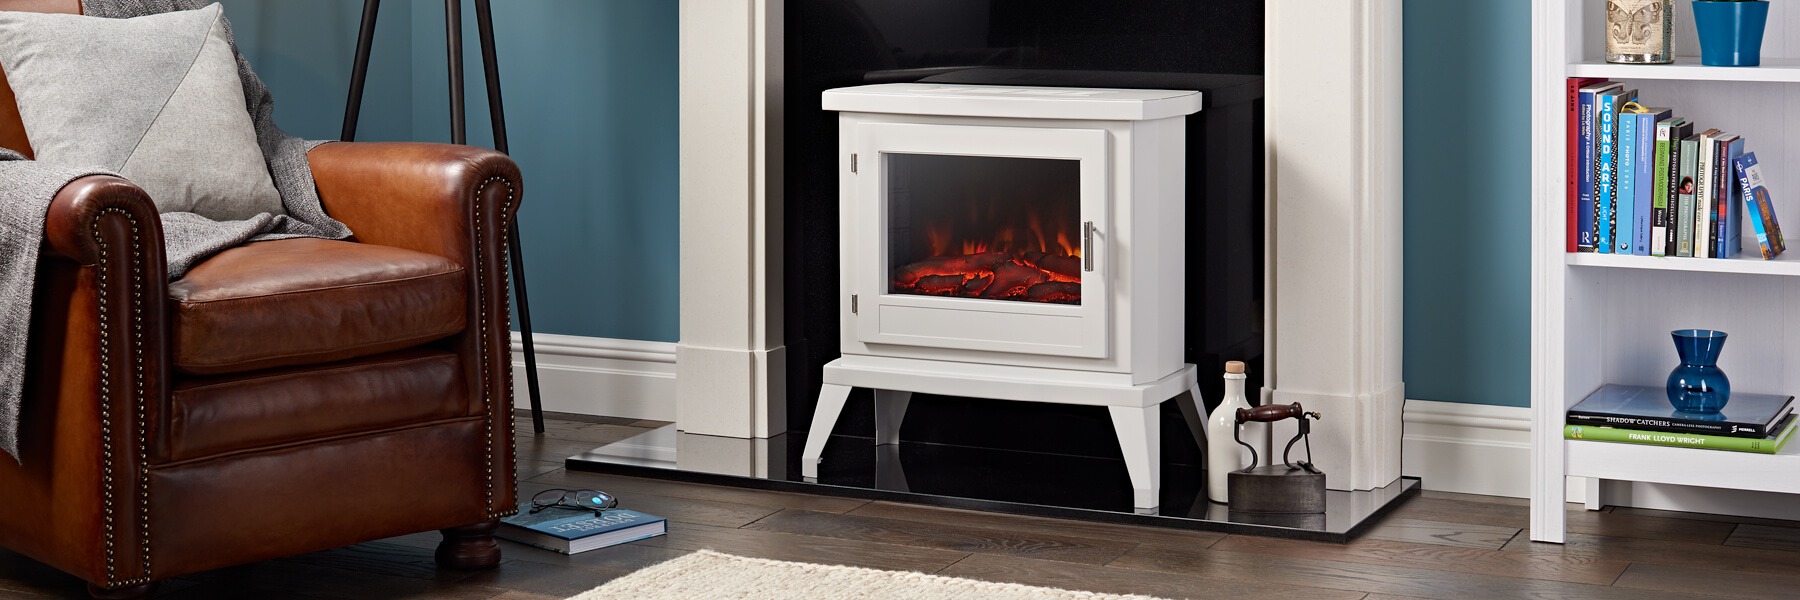 Freestanding Stoves - Gas / LPG / Electric